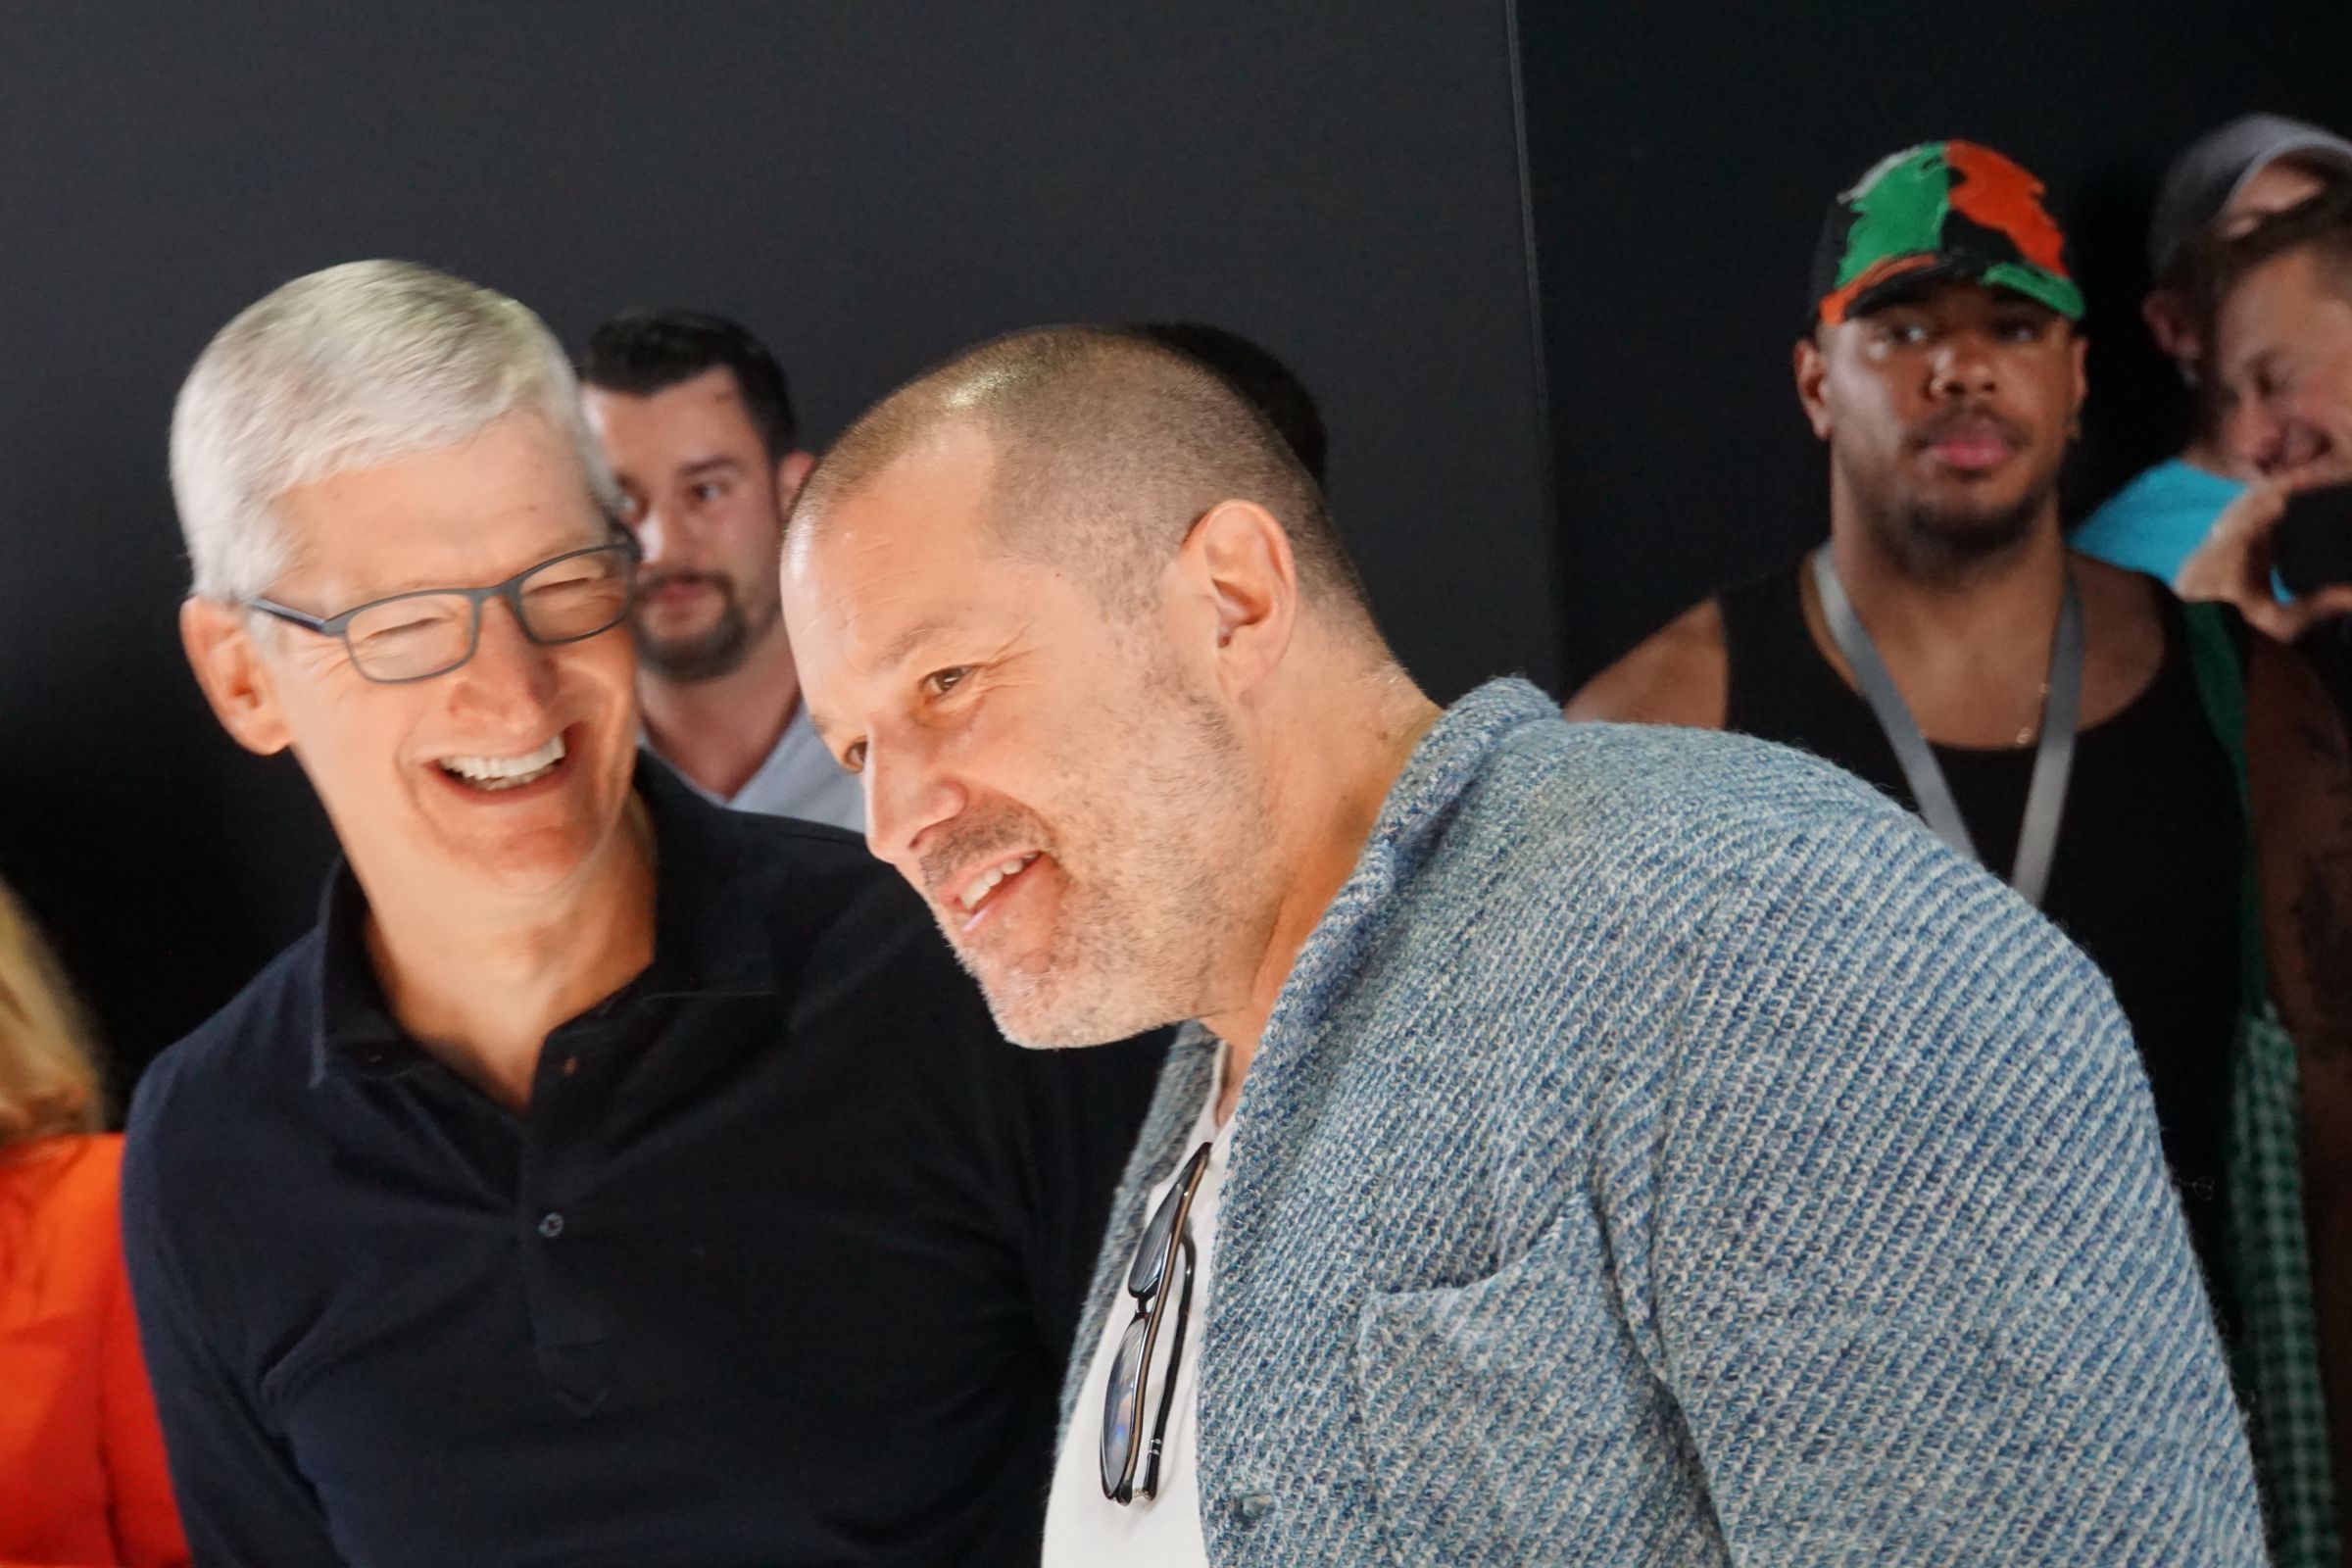 Apple boss Cook and design boss Ive